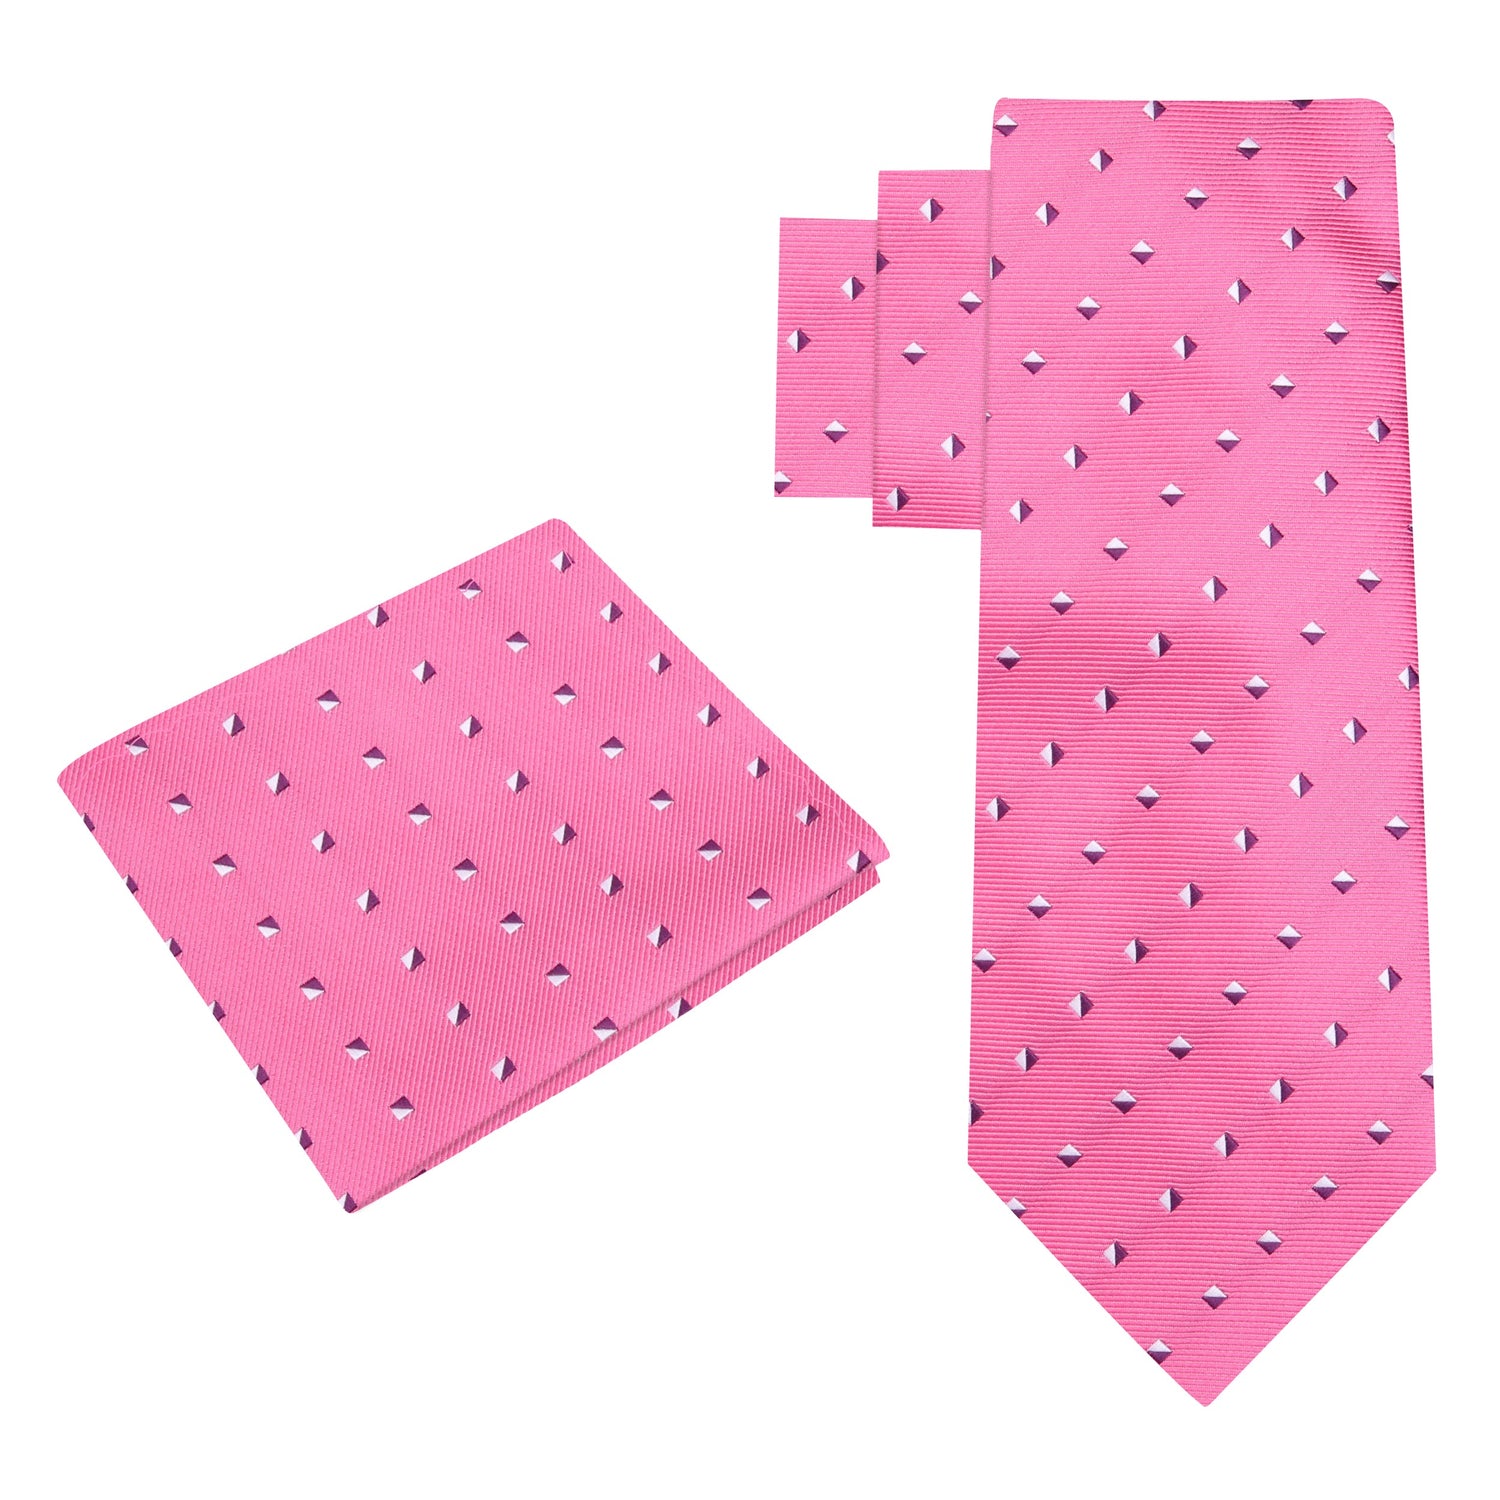 Alt View: Pink, White Geometric Tie and Pocket Square